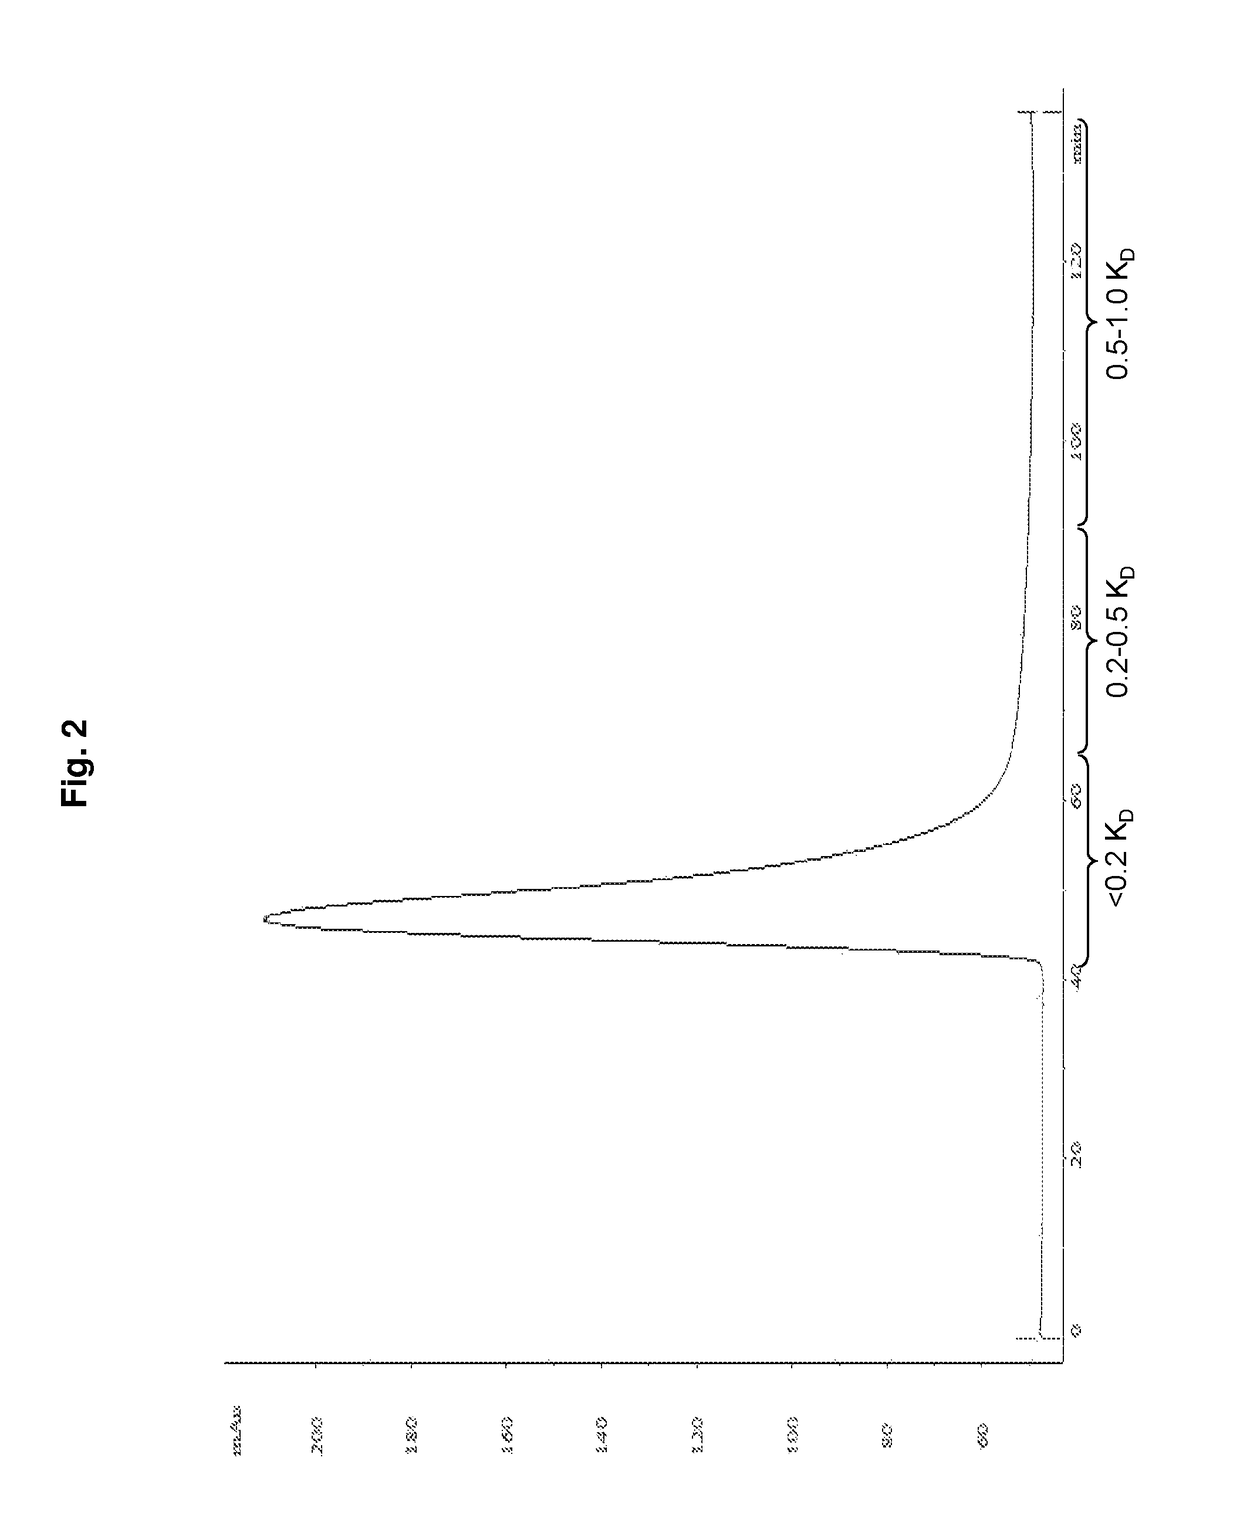 Purification of polysaccharide protein conjugates